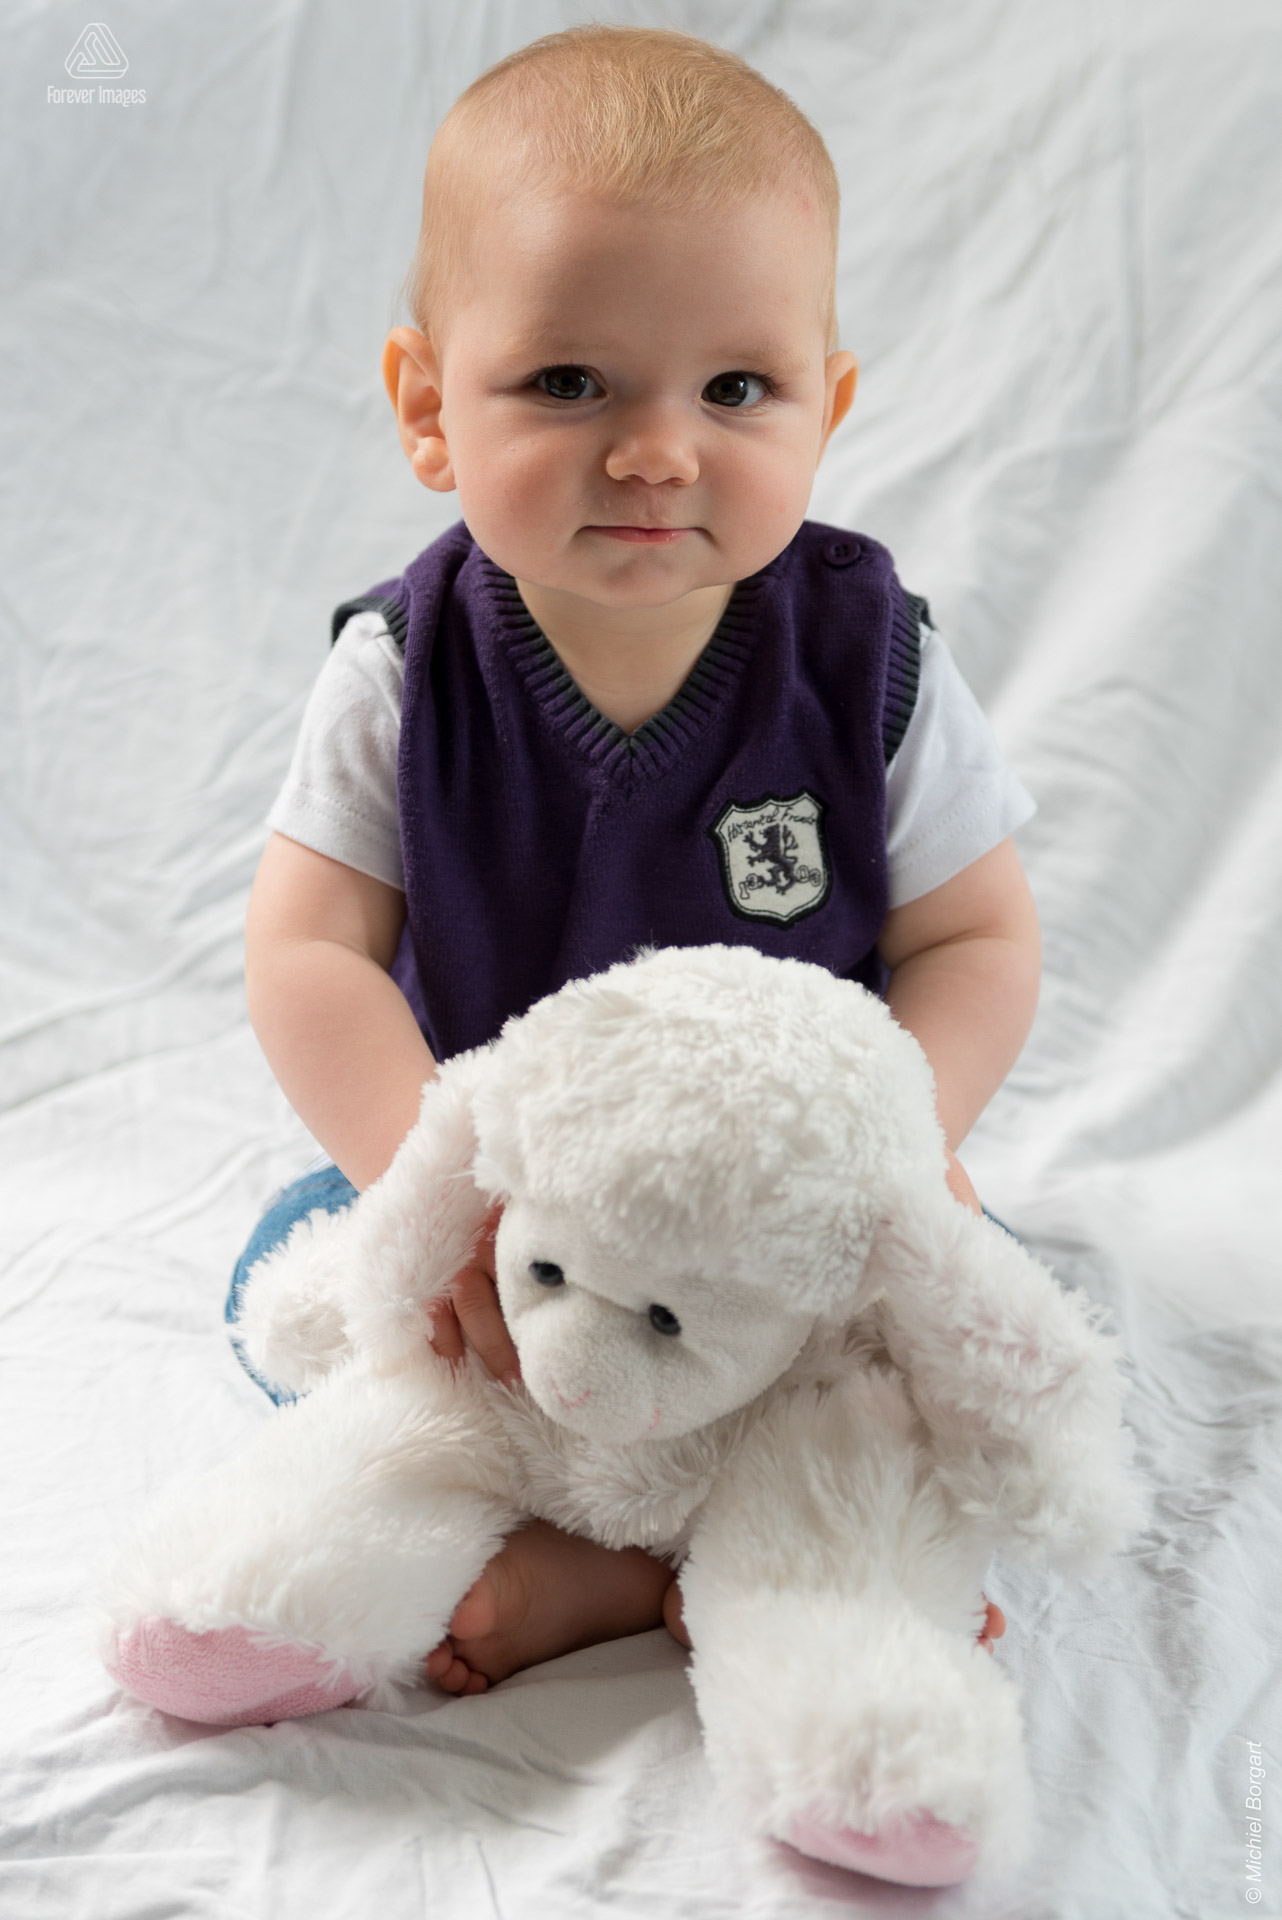 Child photo baby with his cuddly toy | Elias | Portrait Photographer Michiel Borgart - Forever Images.